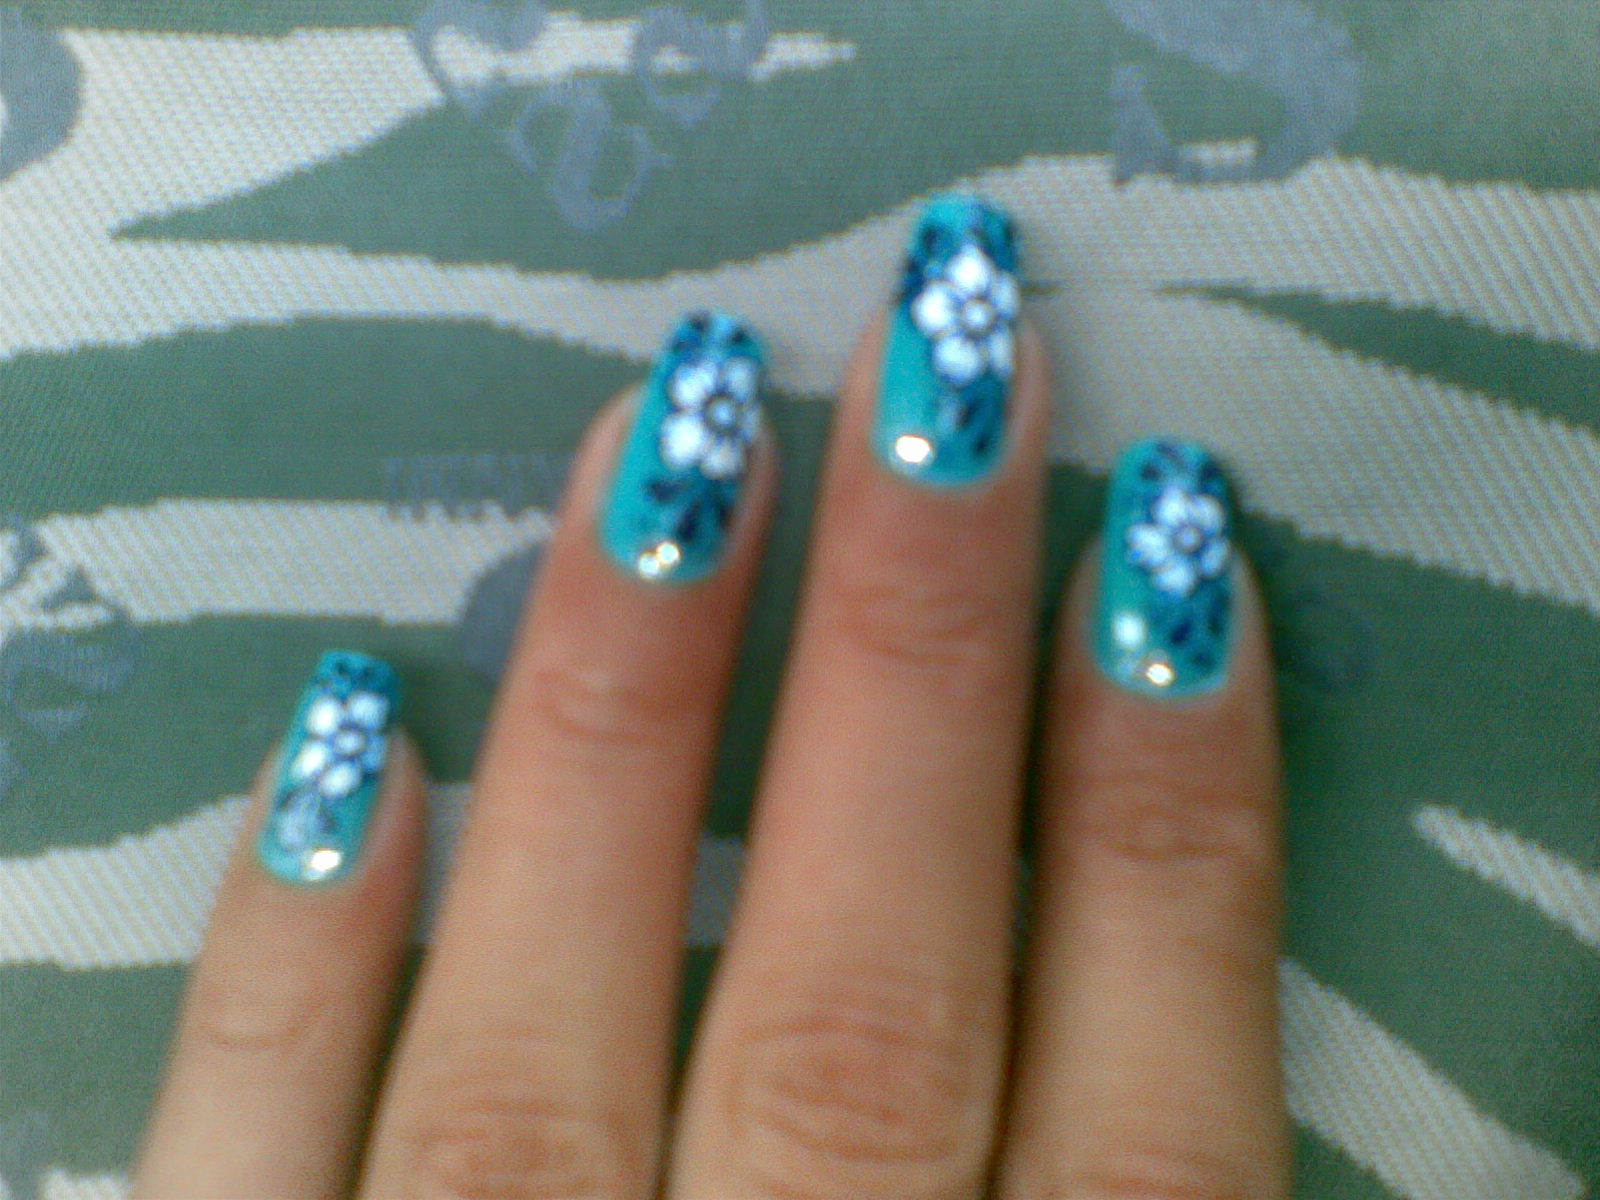 4. "Blue Floral Prom Nail Art" - wide 4